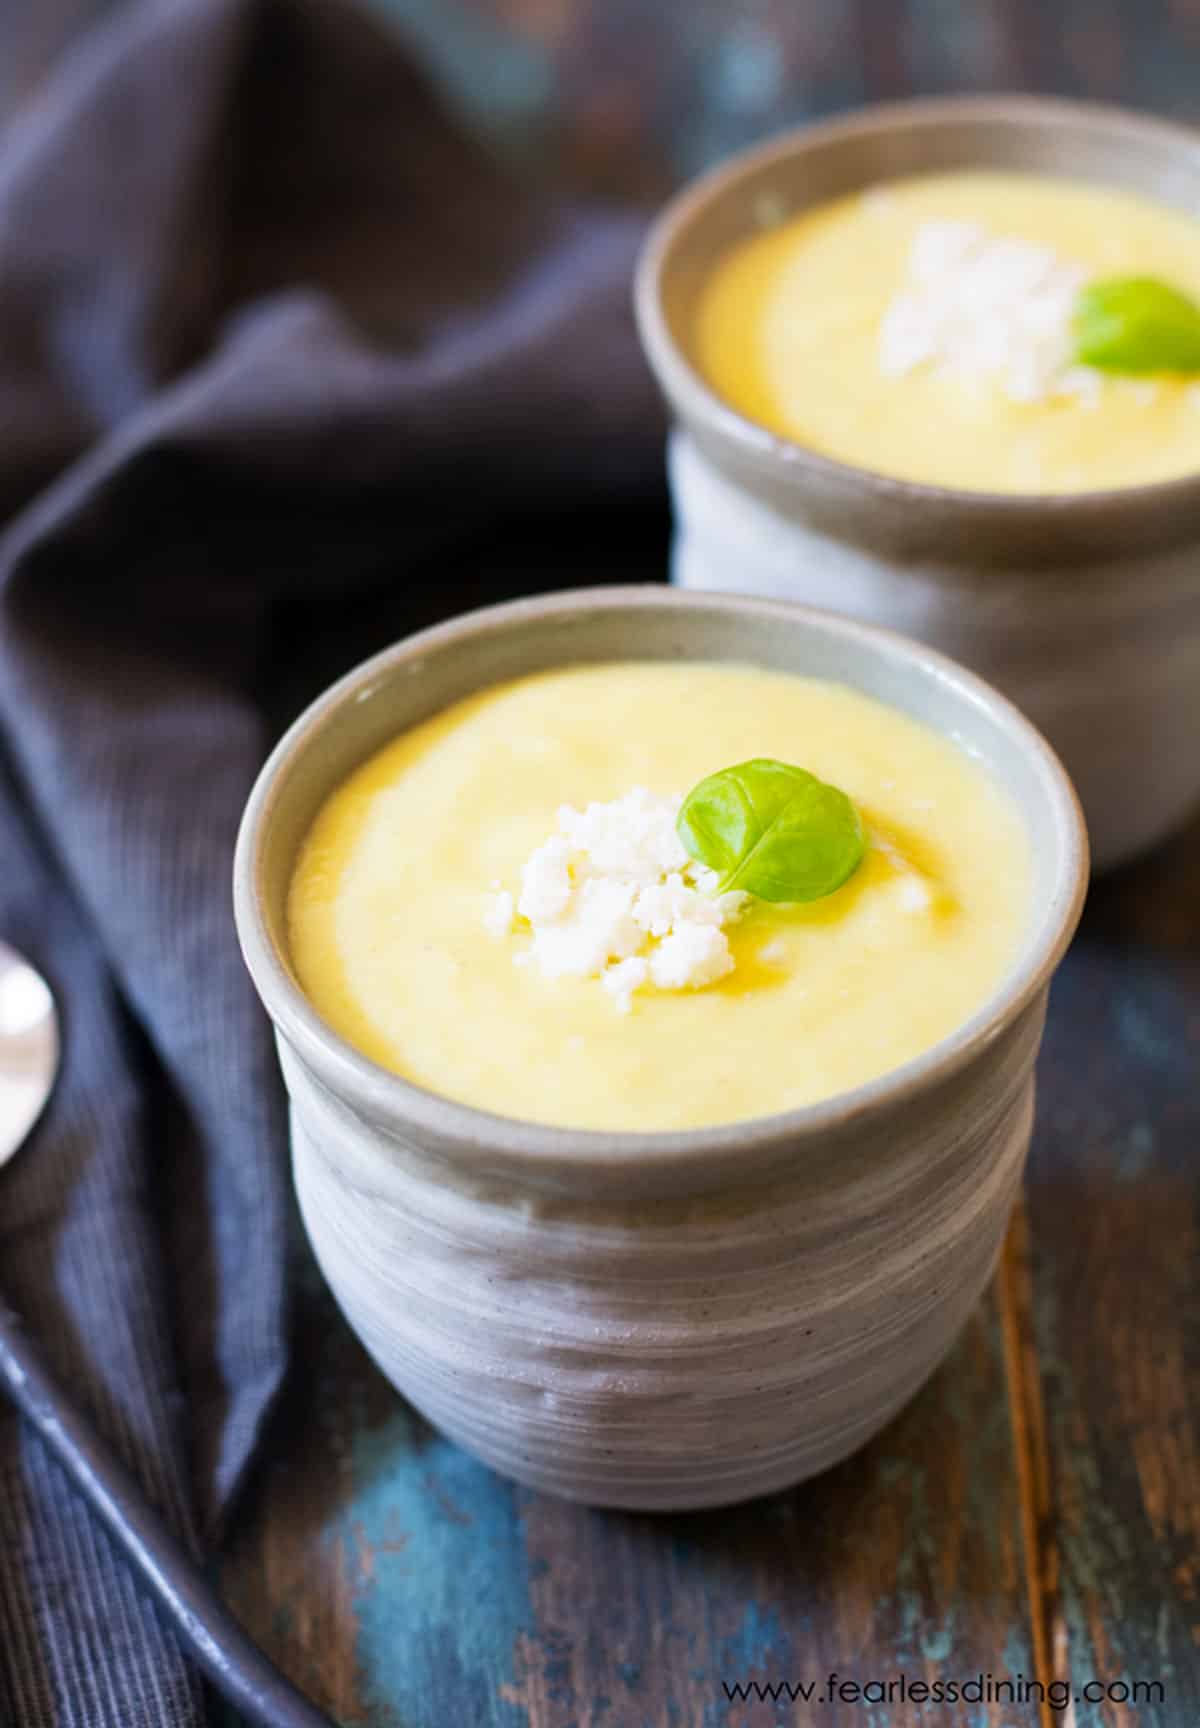 Two small bowls of chilled pineapple soup.